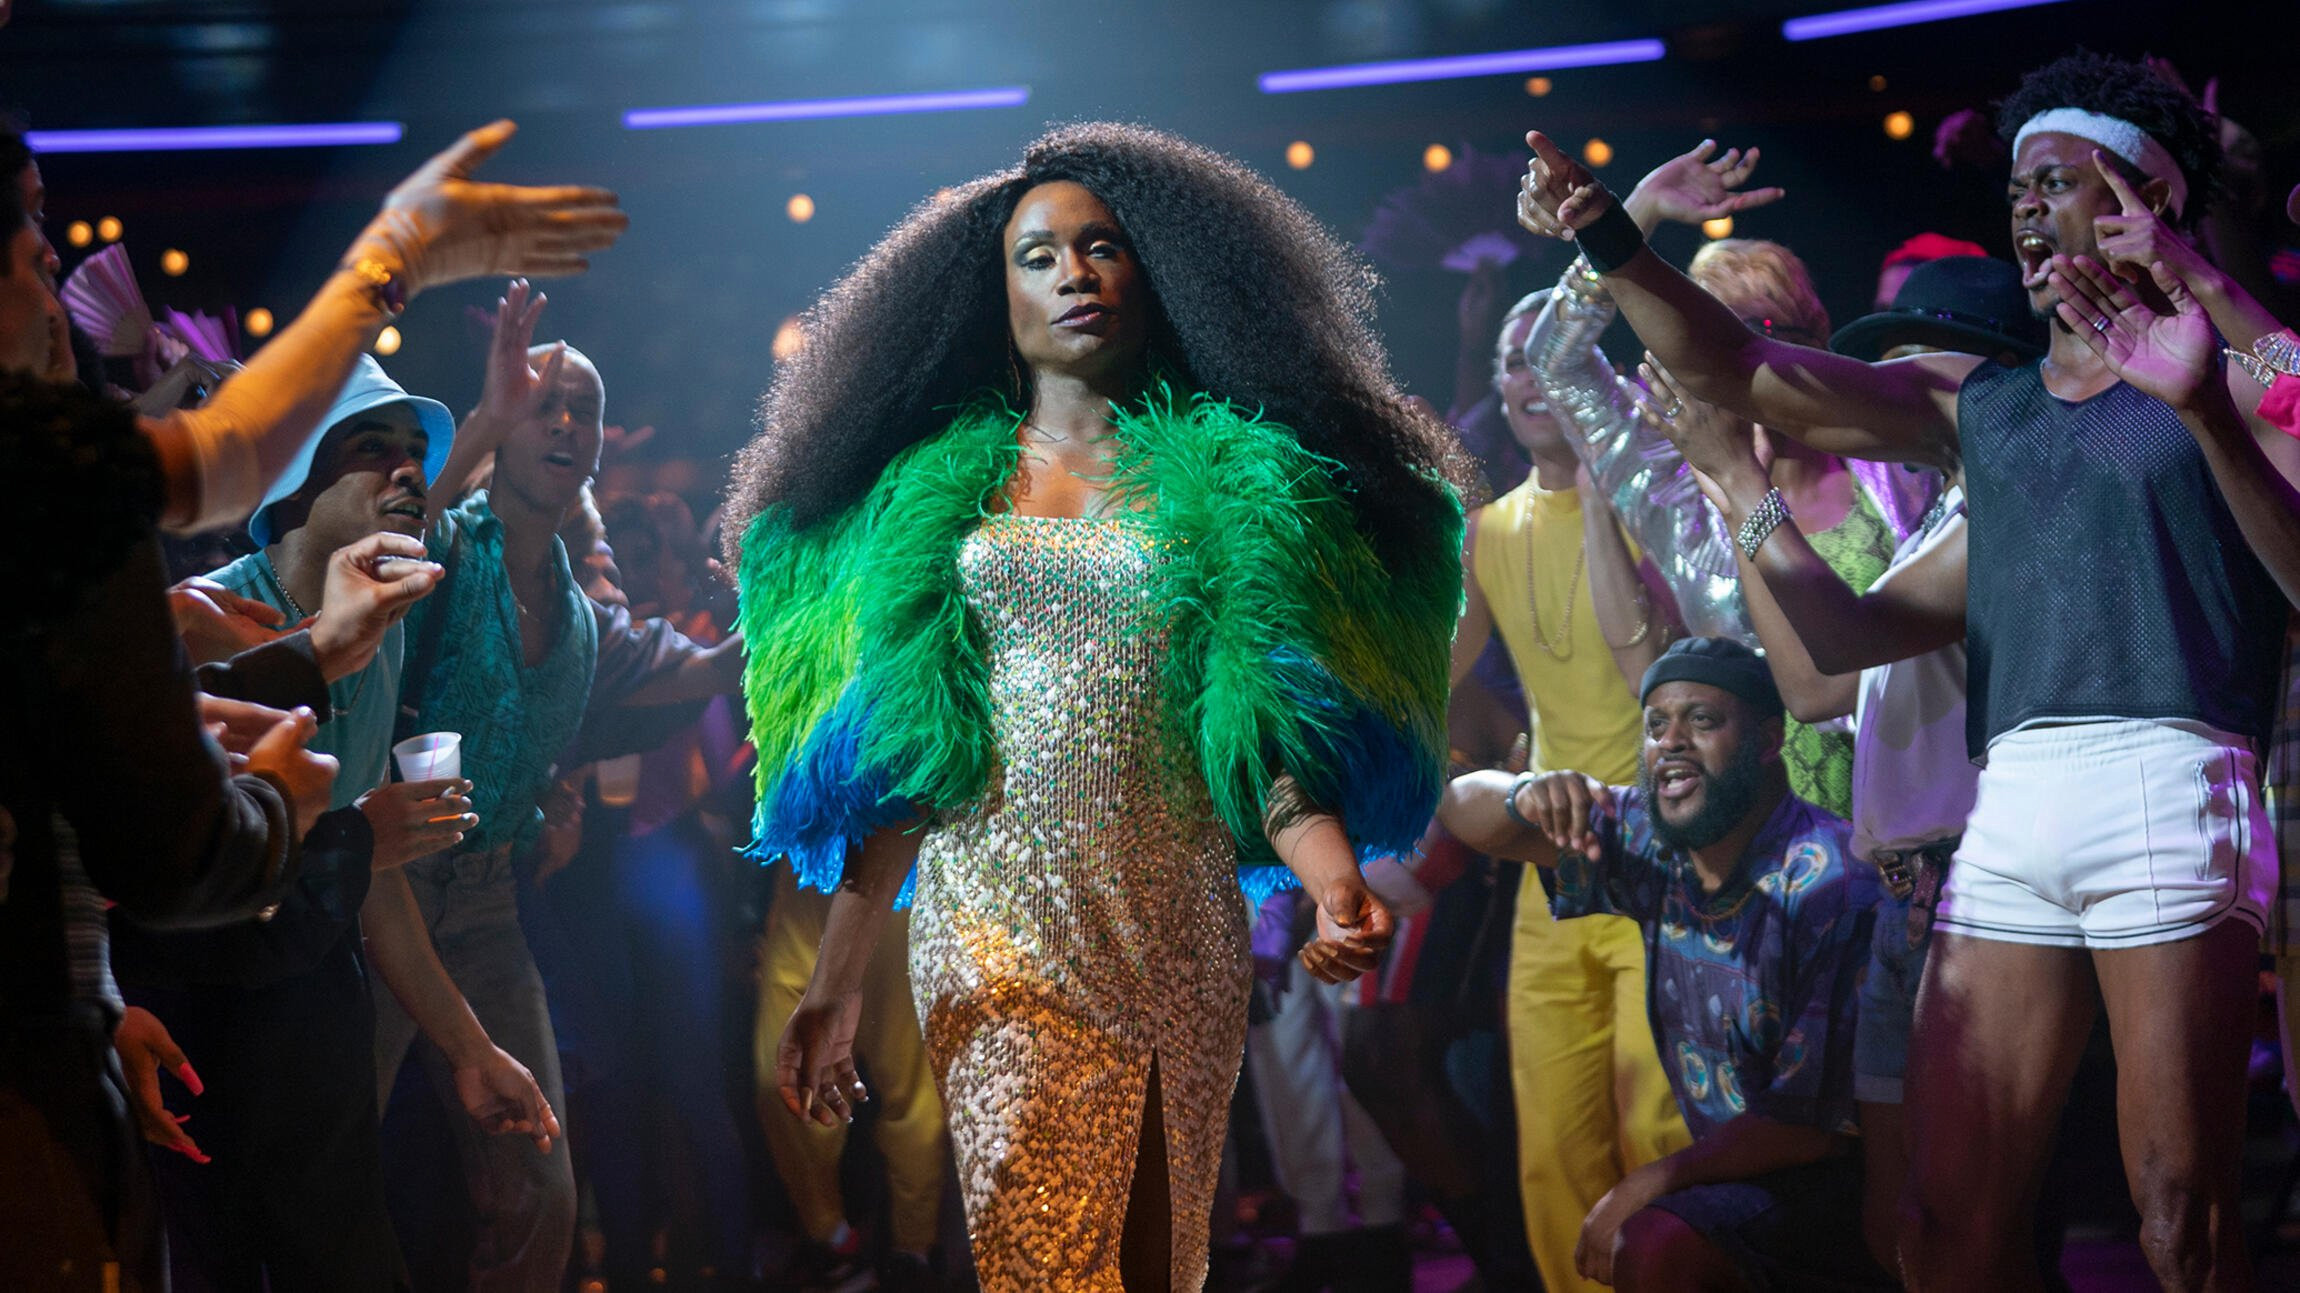 Groundbreaking drama Pose will end with season 3 this summer